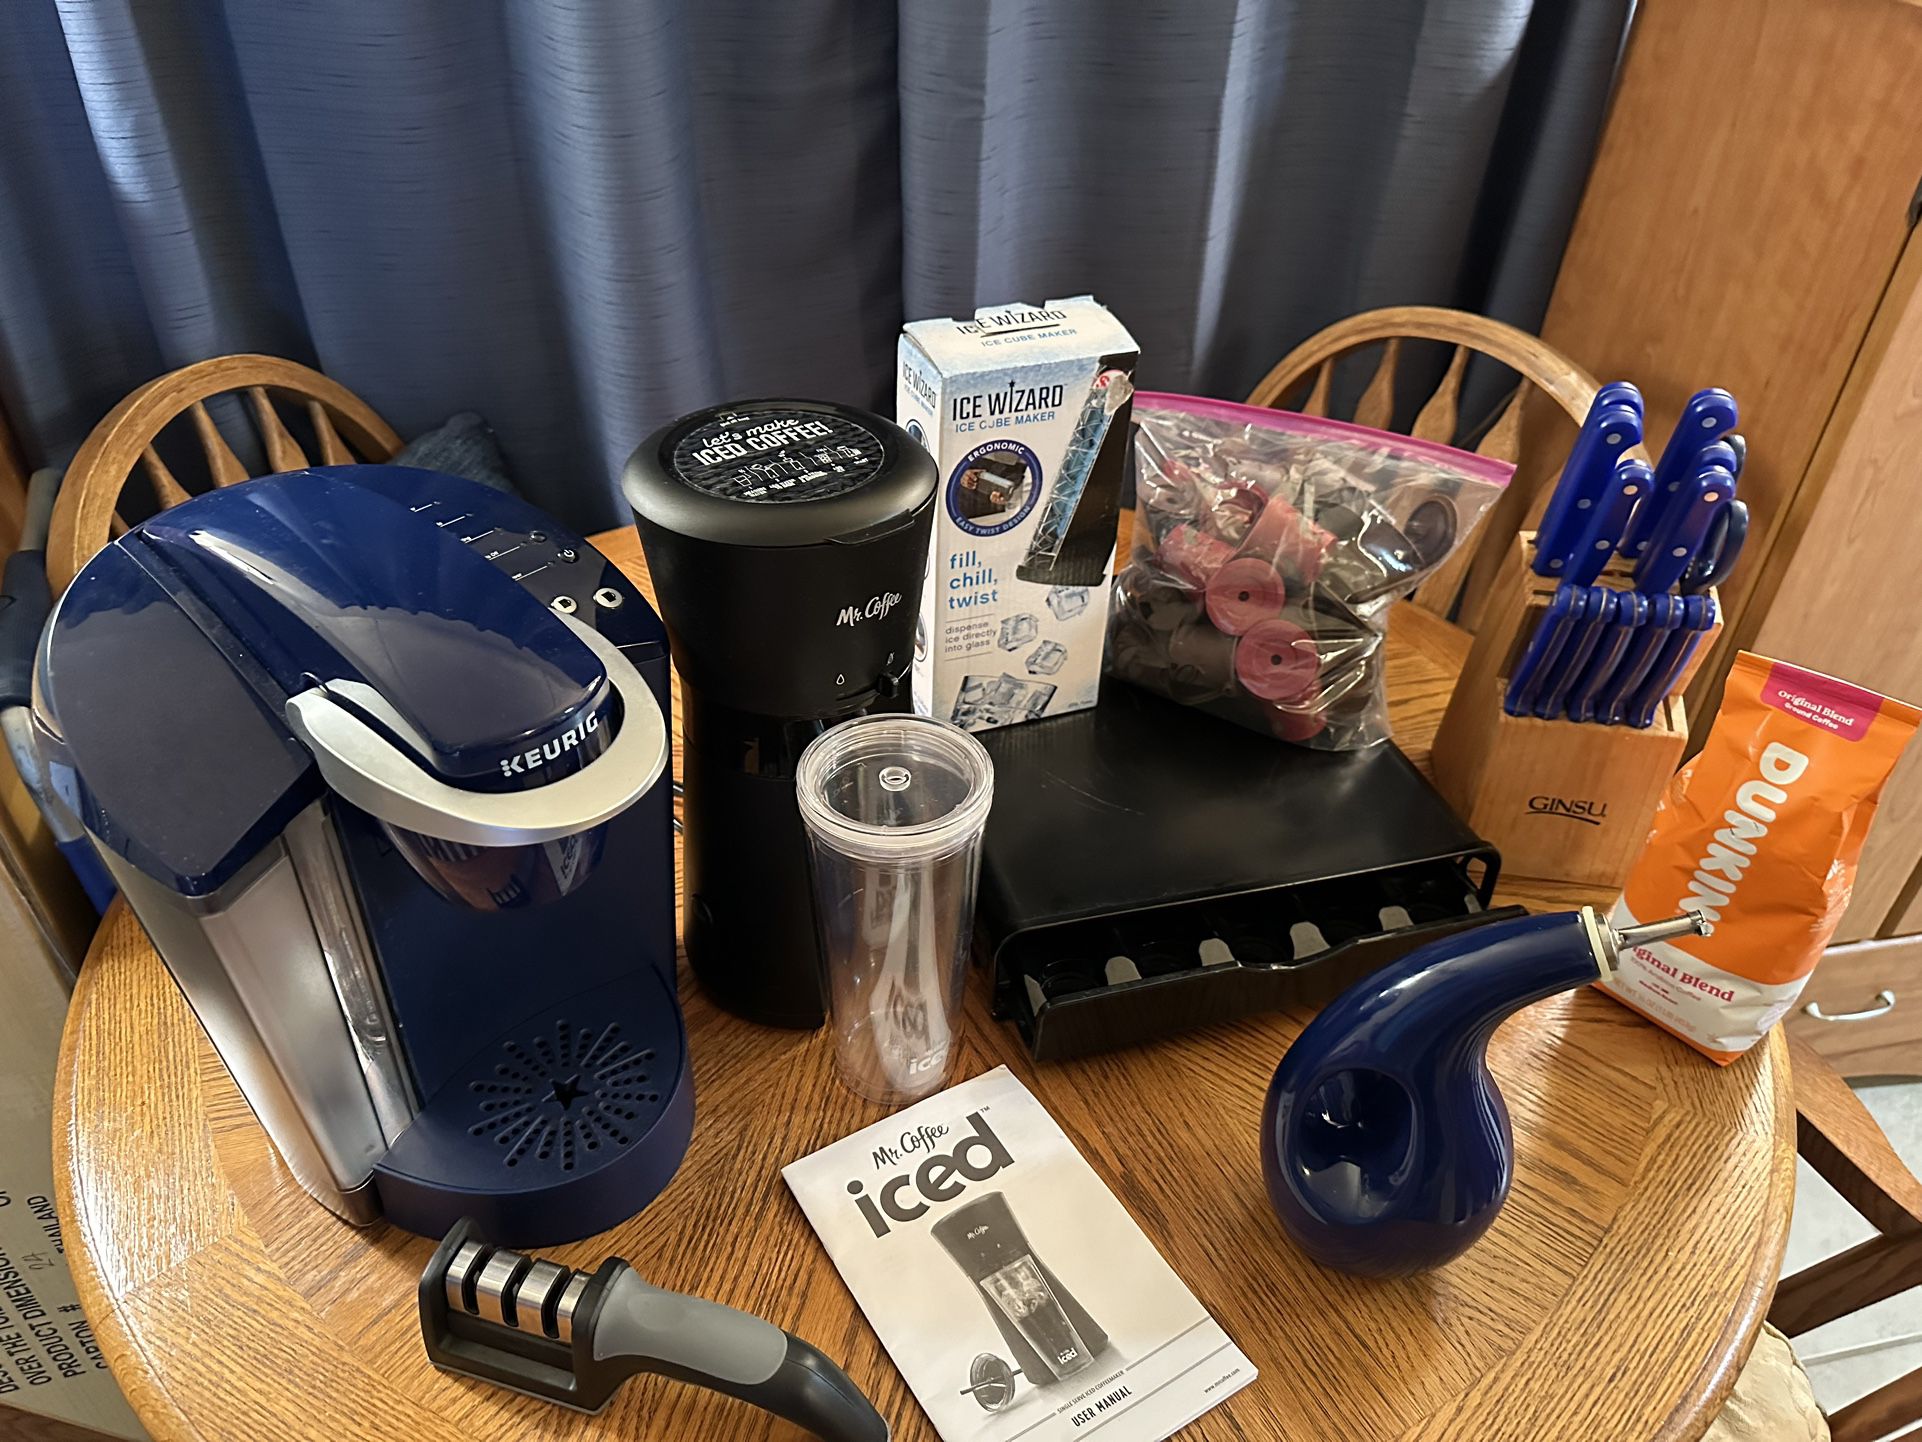 2 Coffee Makers And More!